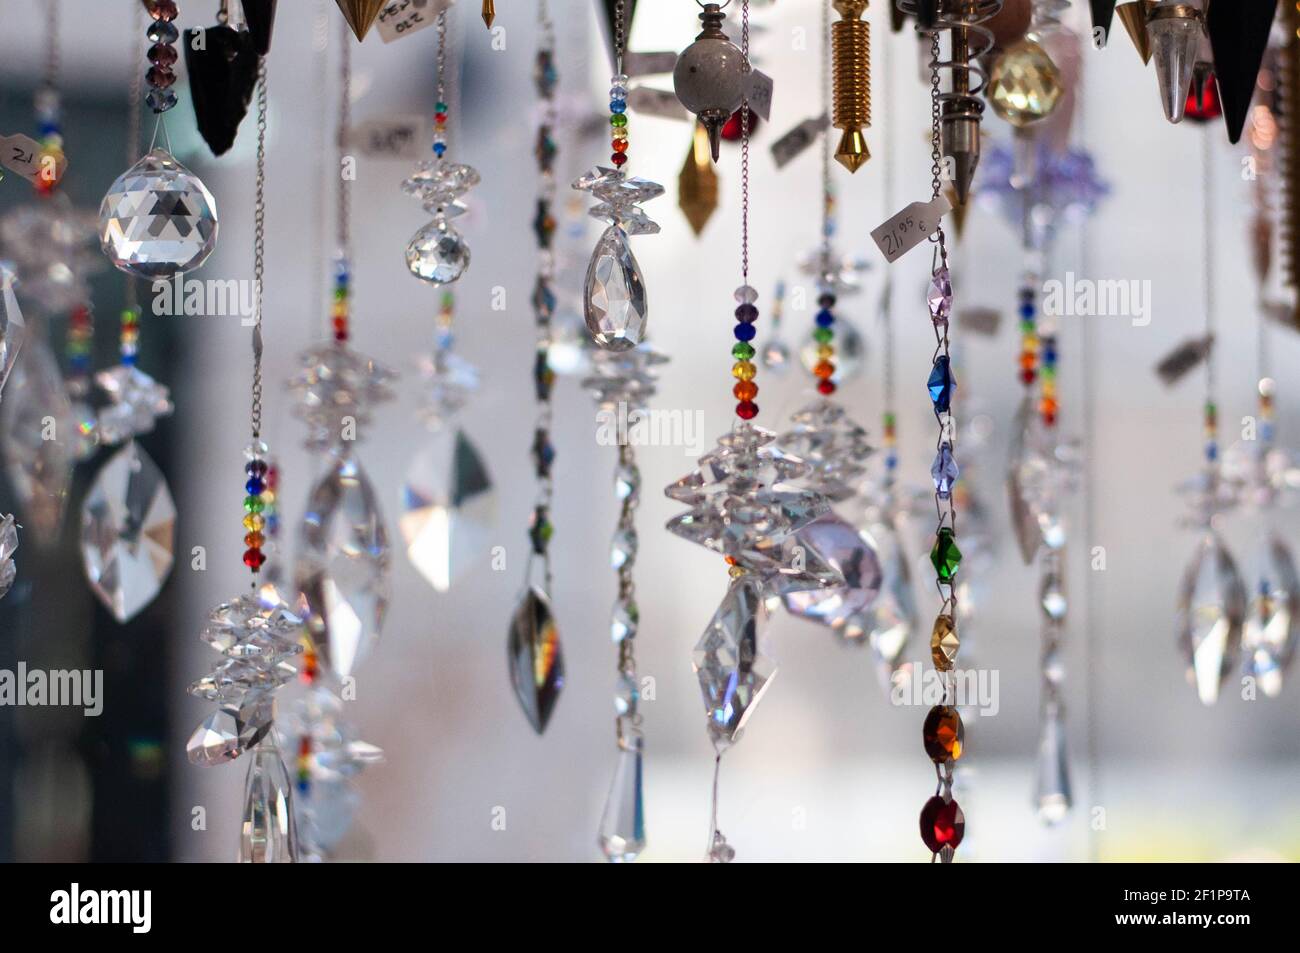 pendulums hanging future prediction tool in store Stock Photo